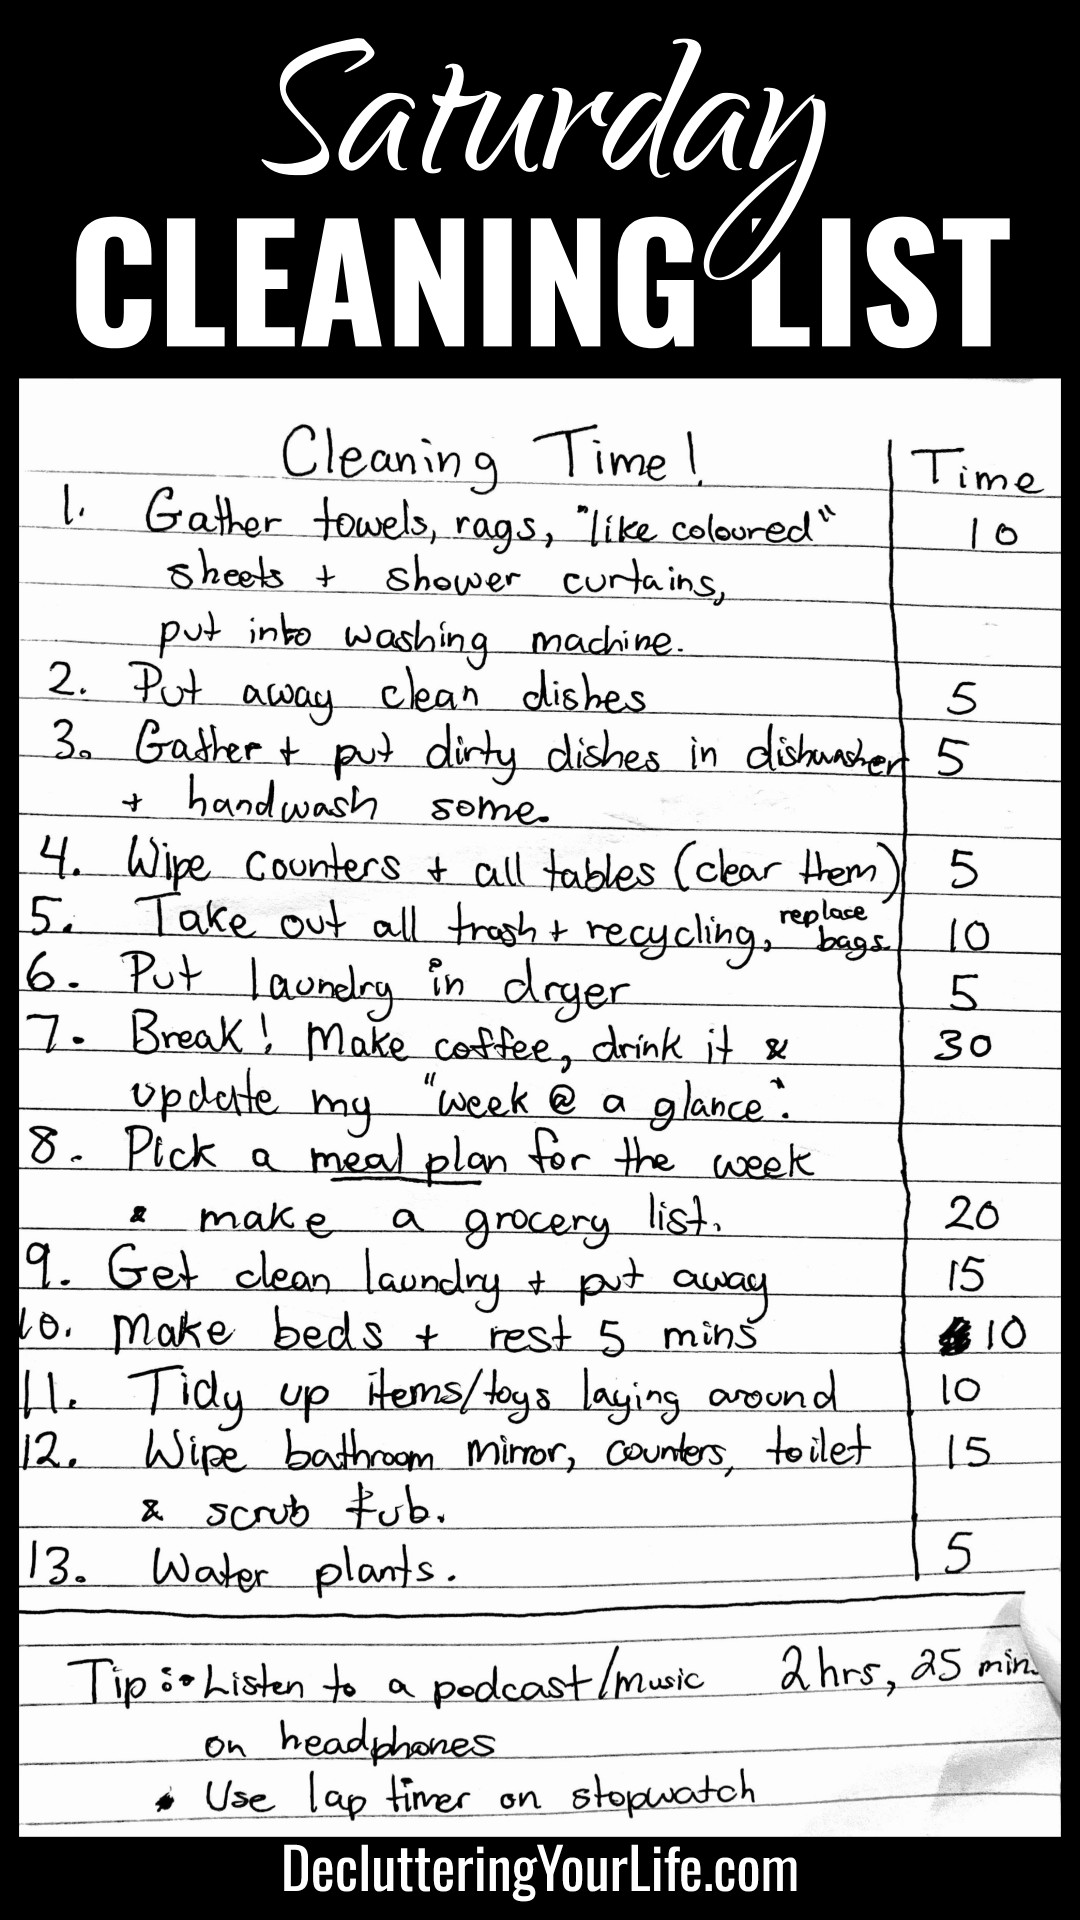 Saturday House Cleaning List